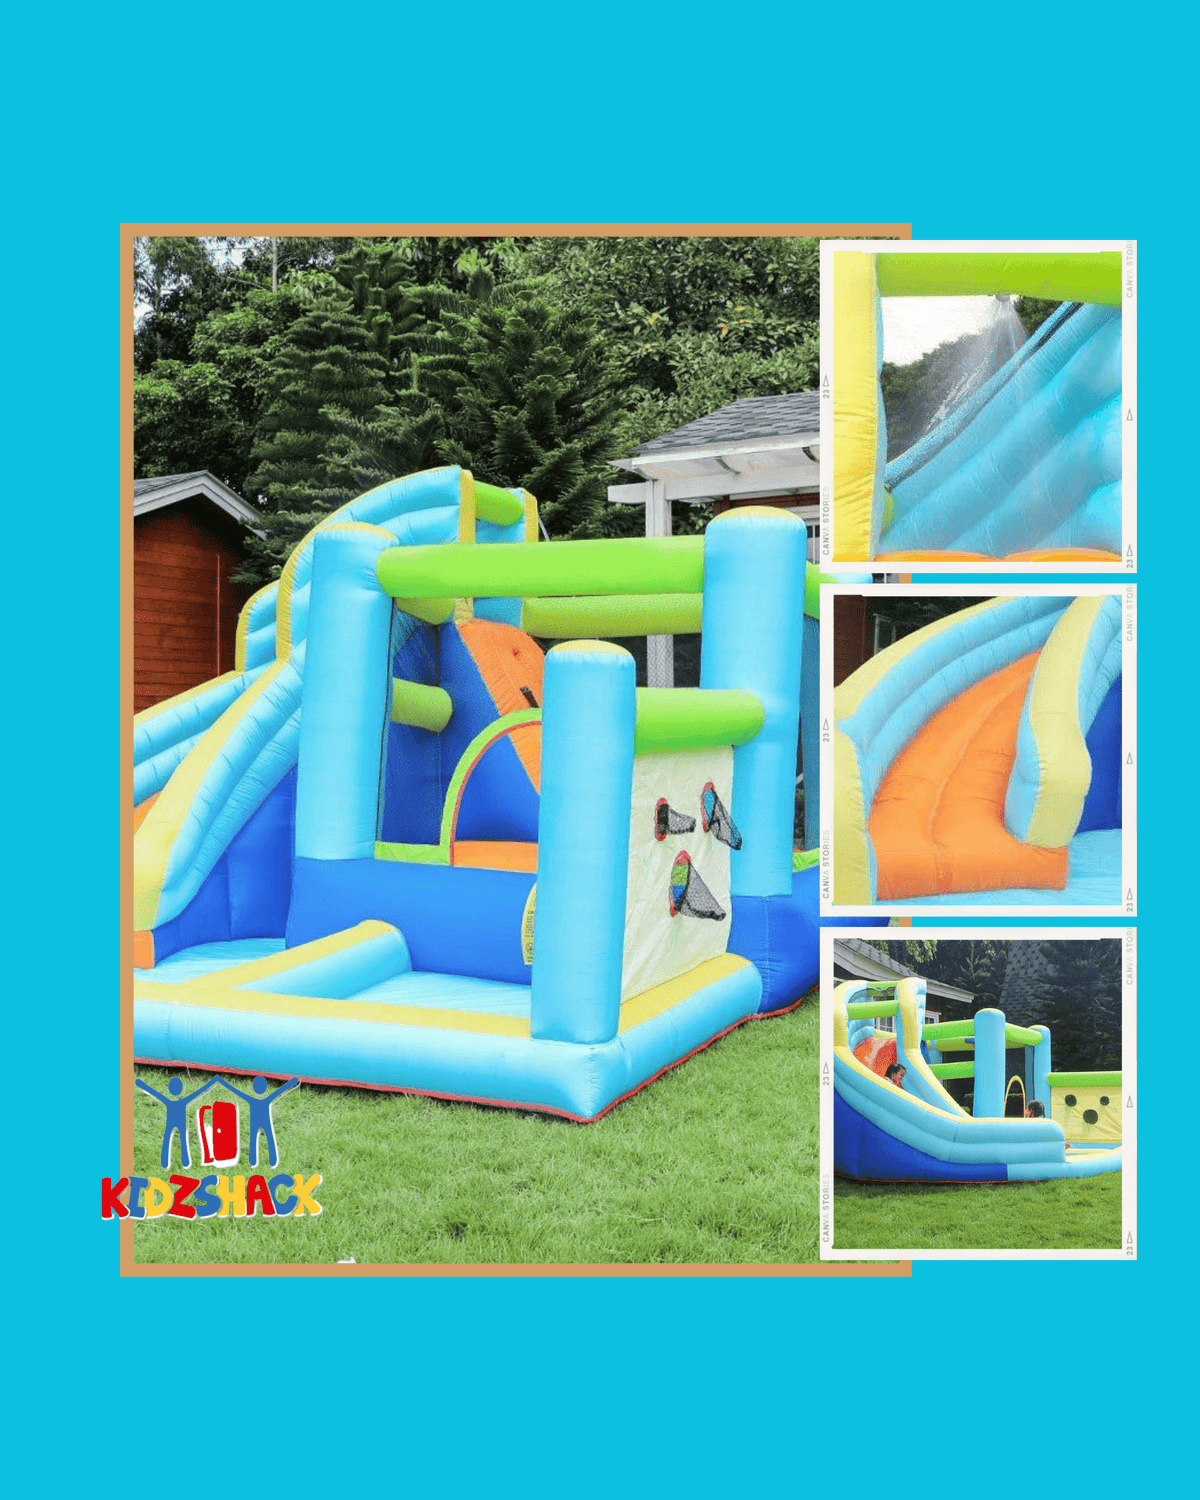 Blue Bouncy Castle Jumping Castle with Slide (73003)